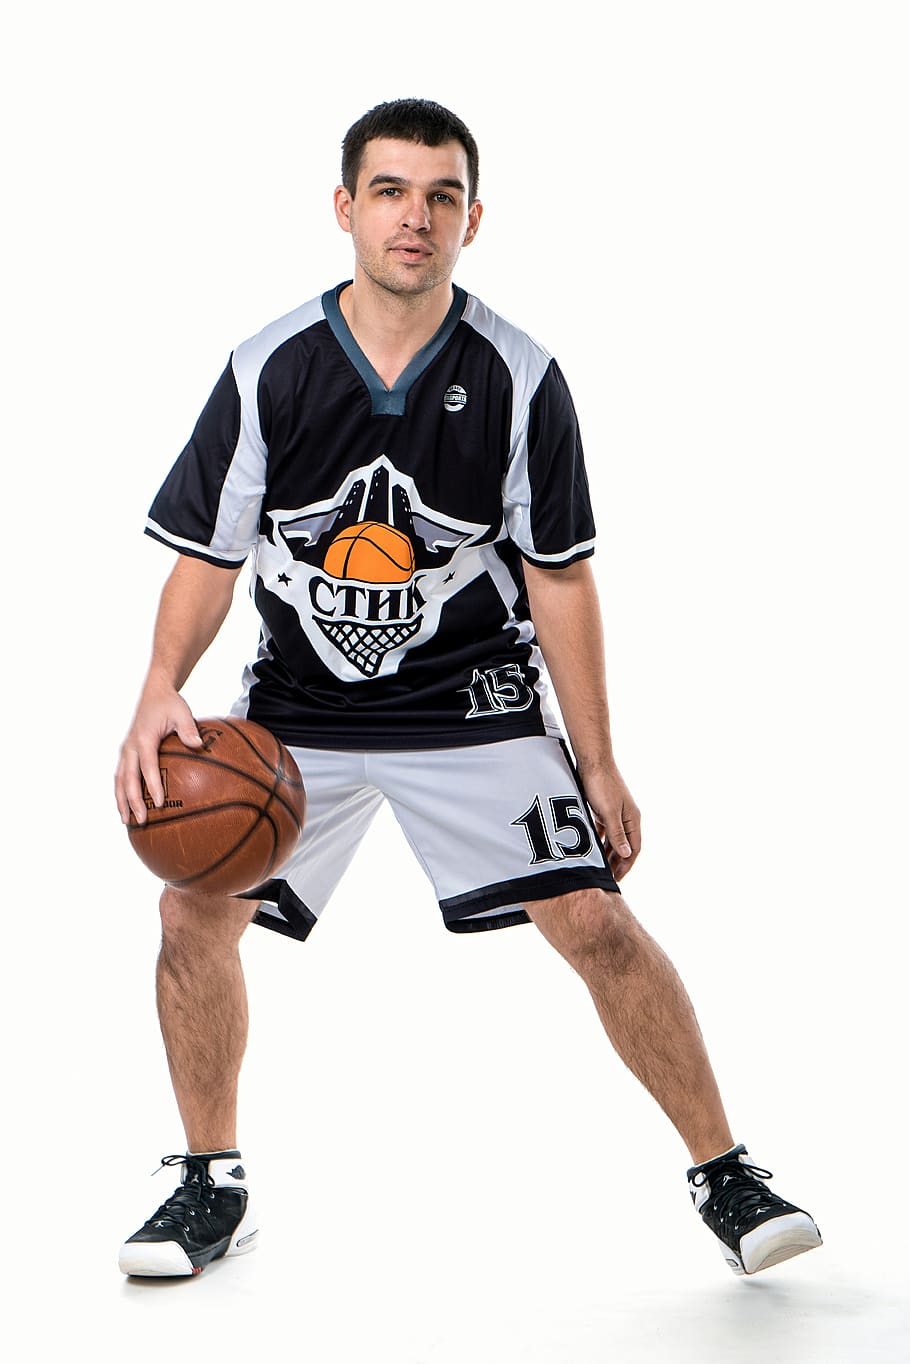 young, man, sports, a successful person, basketball, basketball player, photoshoot, white background, ball, background